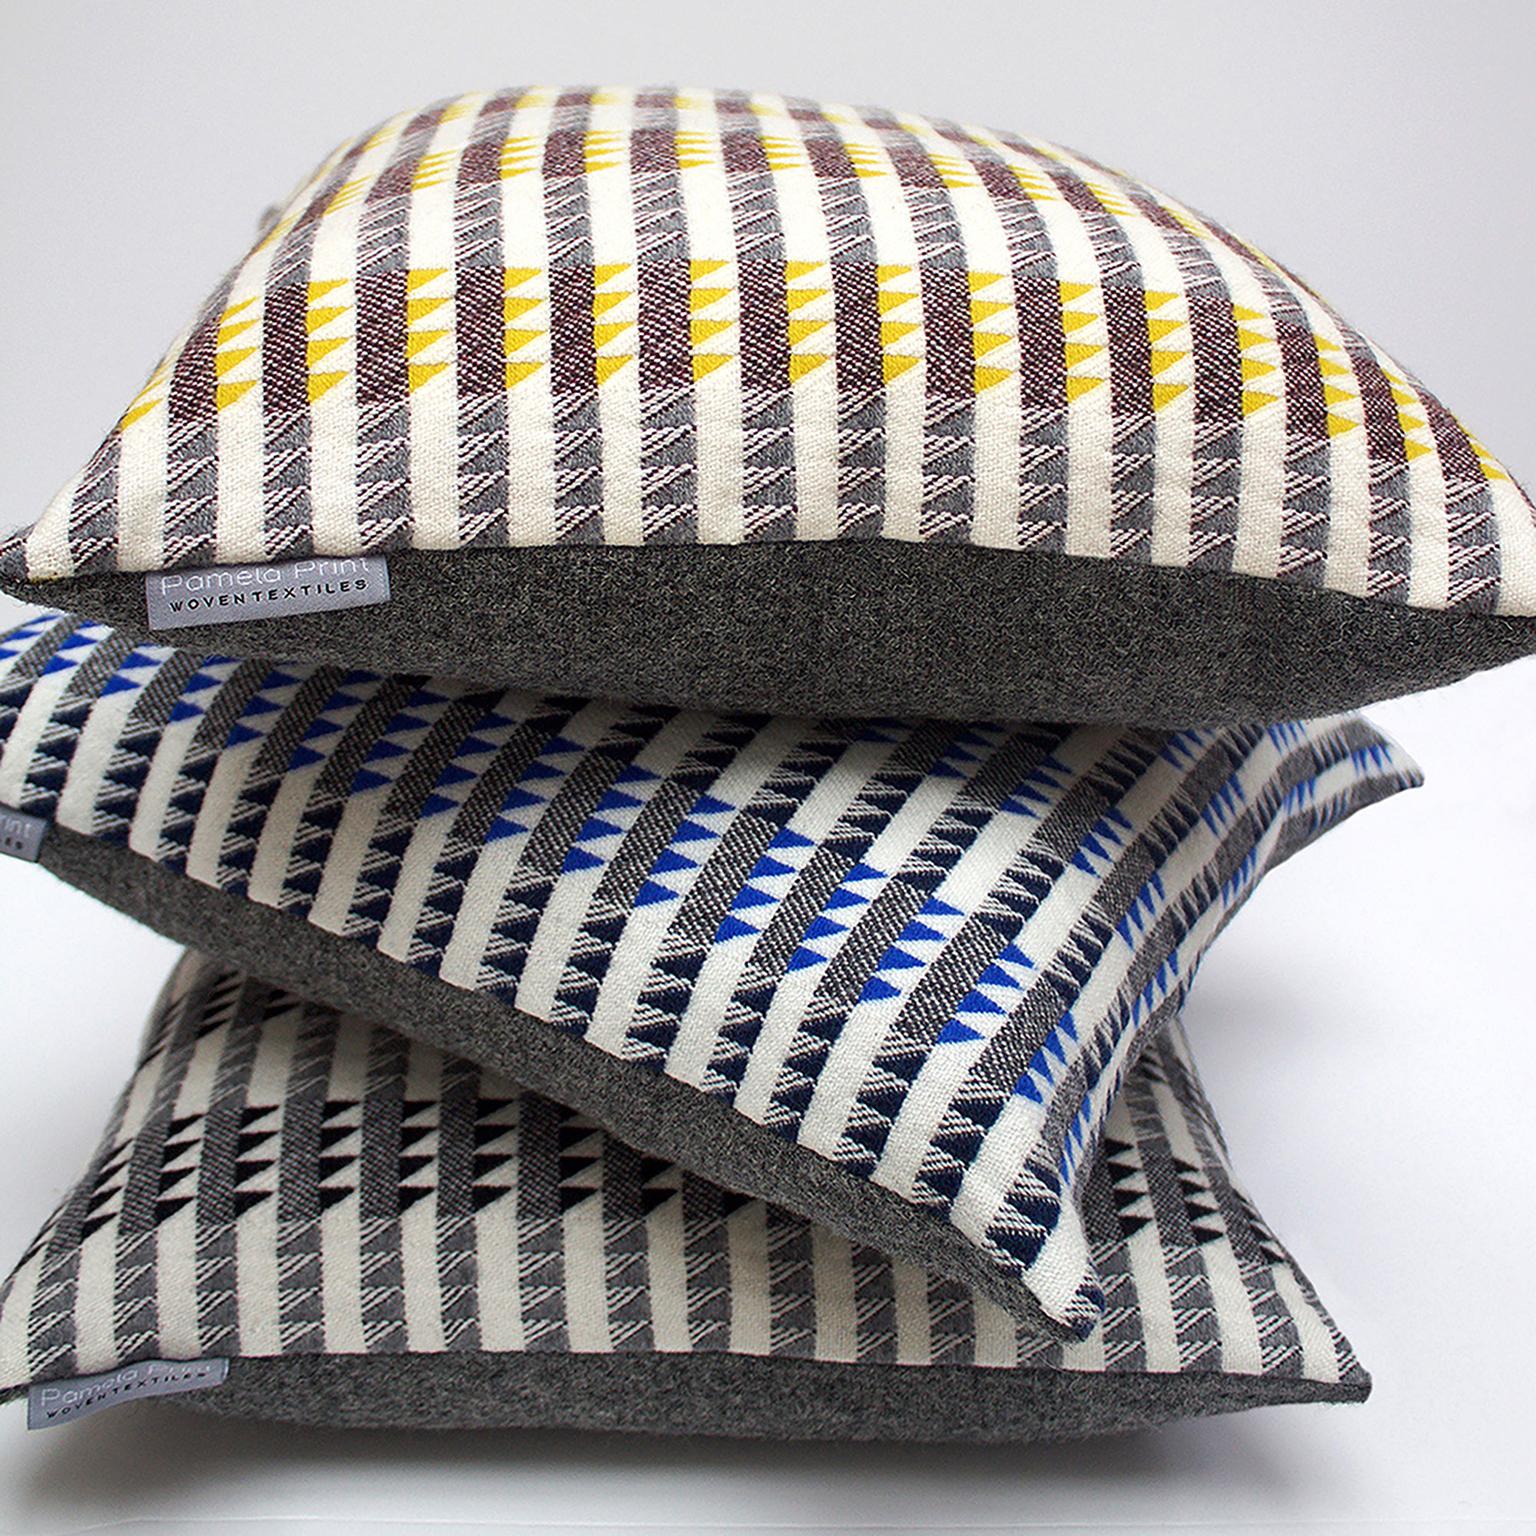 Handwoven 'Ixelles' Geometric Merino Wool Cushion Pillow, Piccalilli /Greys In New Condition For Sale In Chelmsford, GB